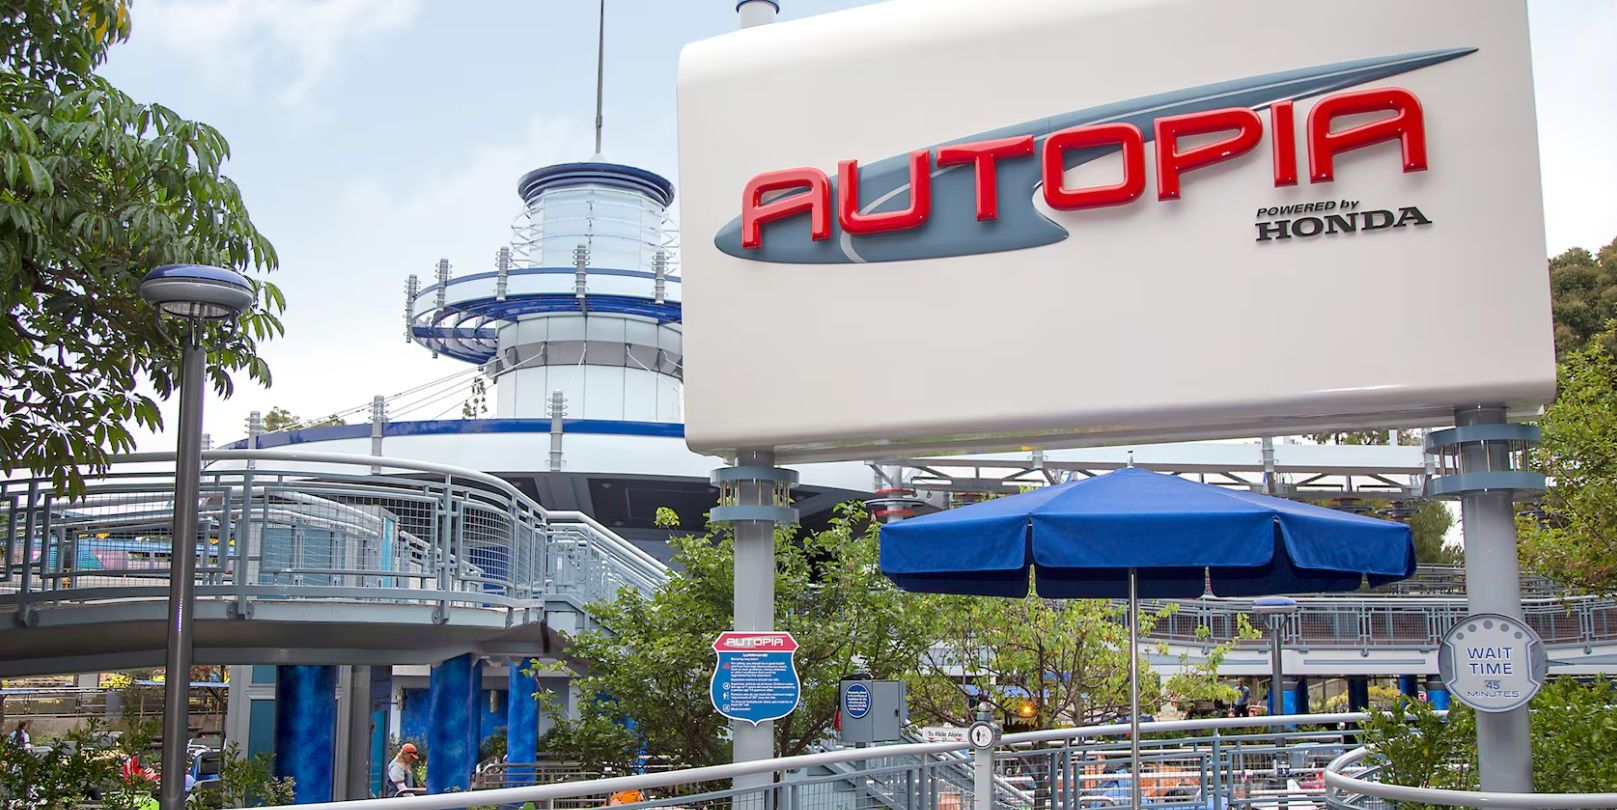 Disneyland's Autopia Attraction Is Dropping Gas Engines